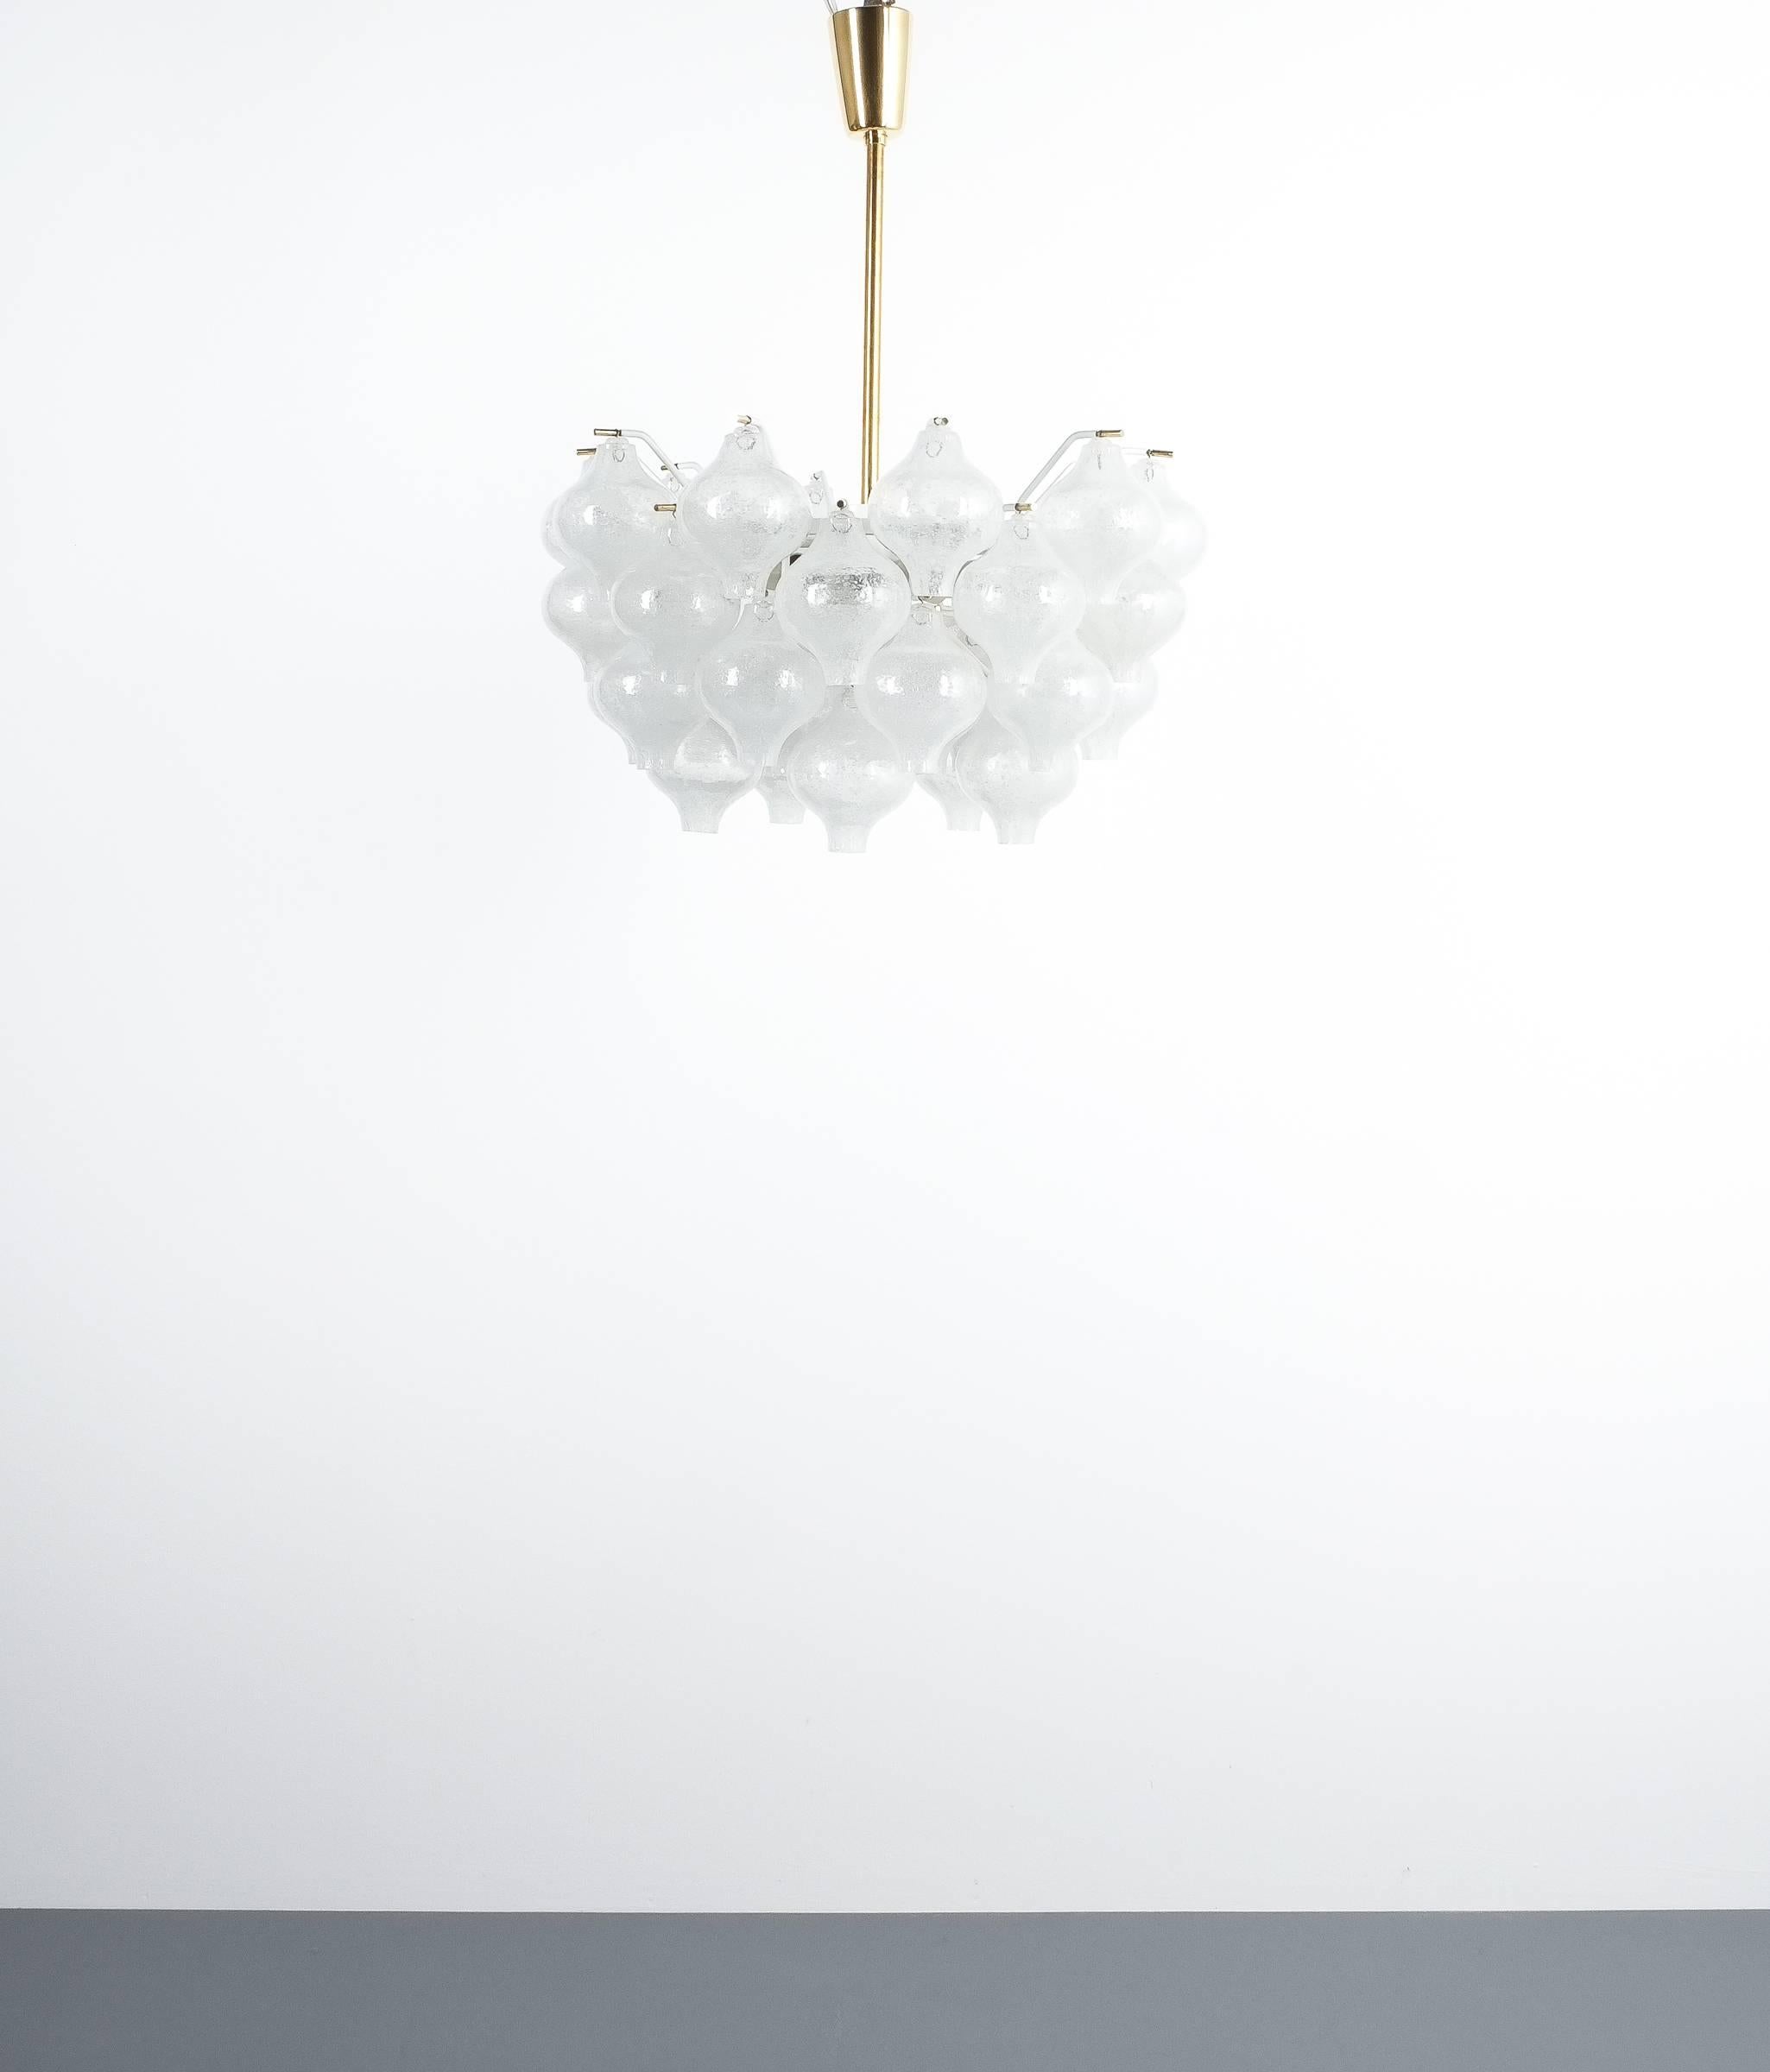 Refurbished J.T. Kalmar Tulipan foam glass chandelier lamp, Austria, 1960. Handblown tulip shaped glass suspending from a refurbished white lacquered brass frame. The brass details/knobs have been polished, the light has been rewired (10 bulbs e14